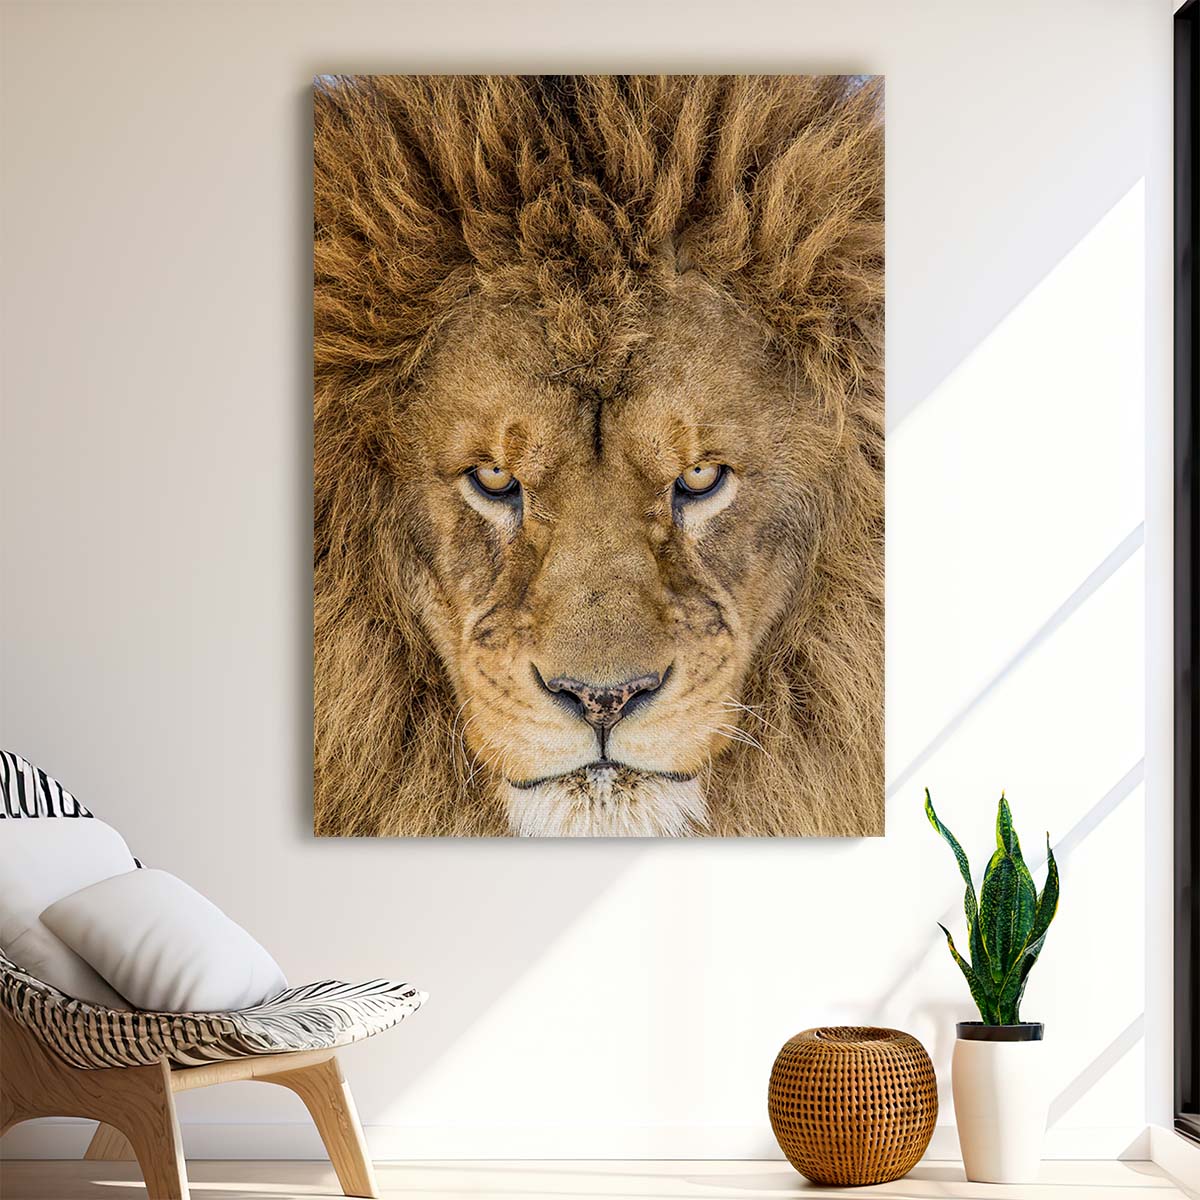 Intense Close-Up Lion Portrait, Wildlife Photography by Mike Centioli by Luxuriance Designs, made in USA